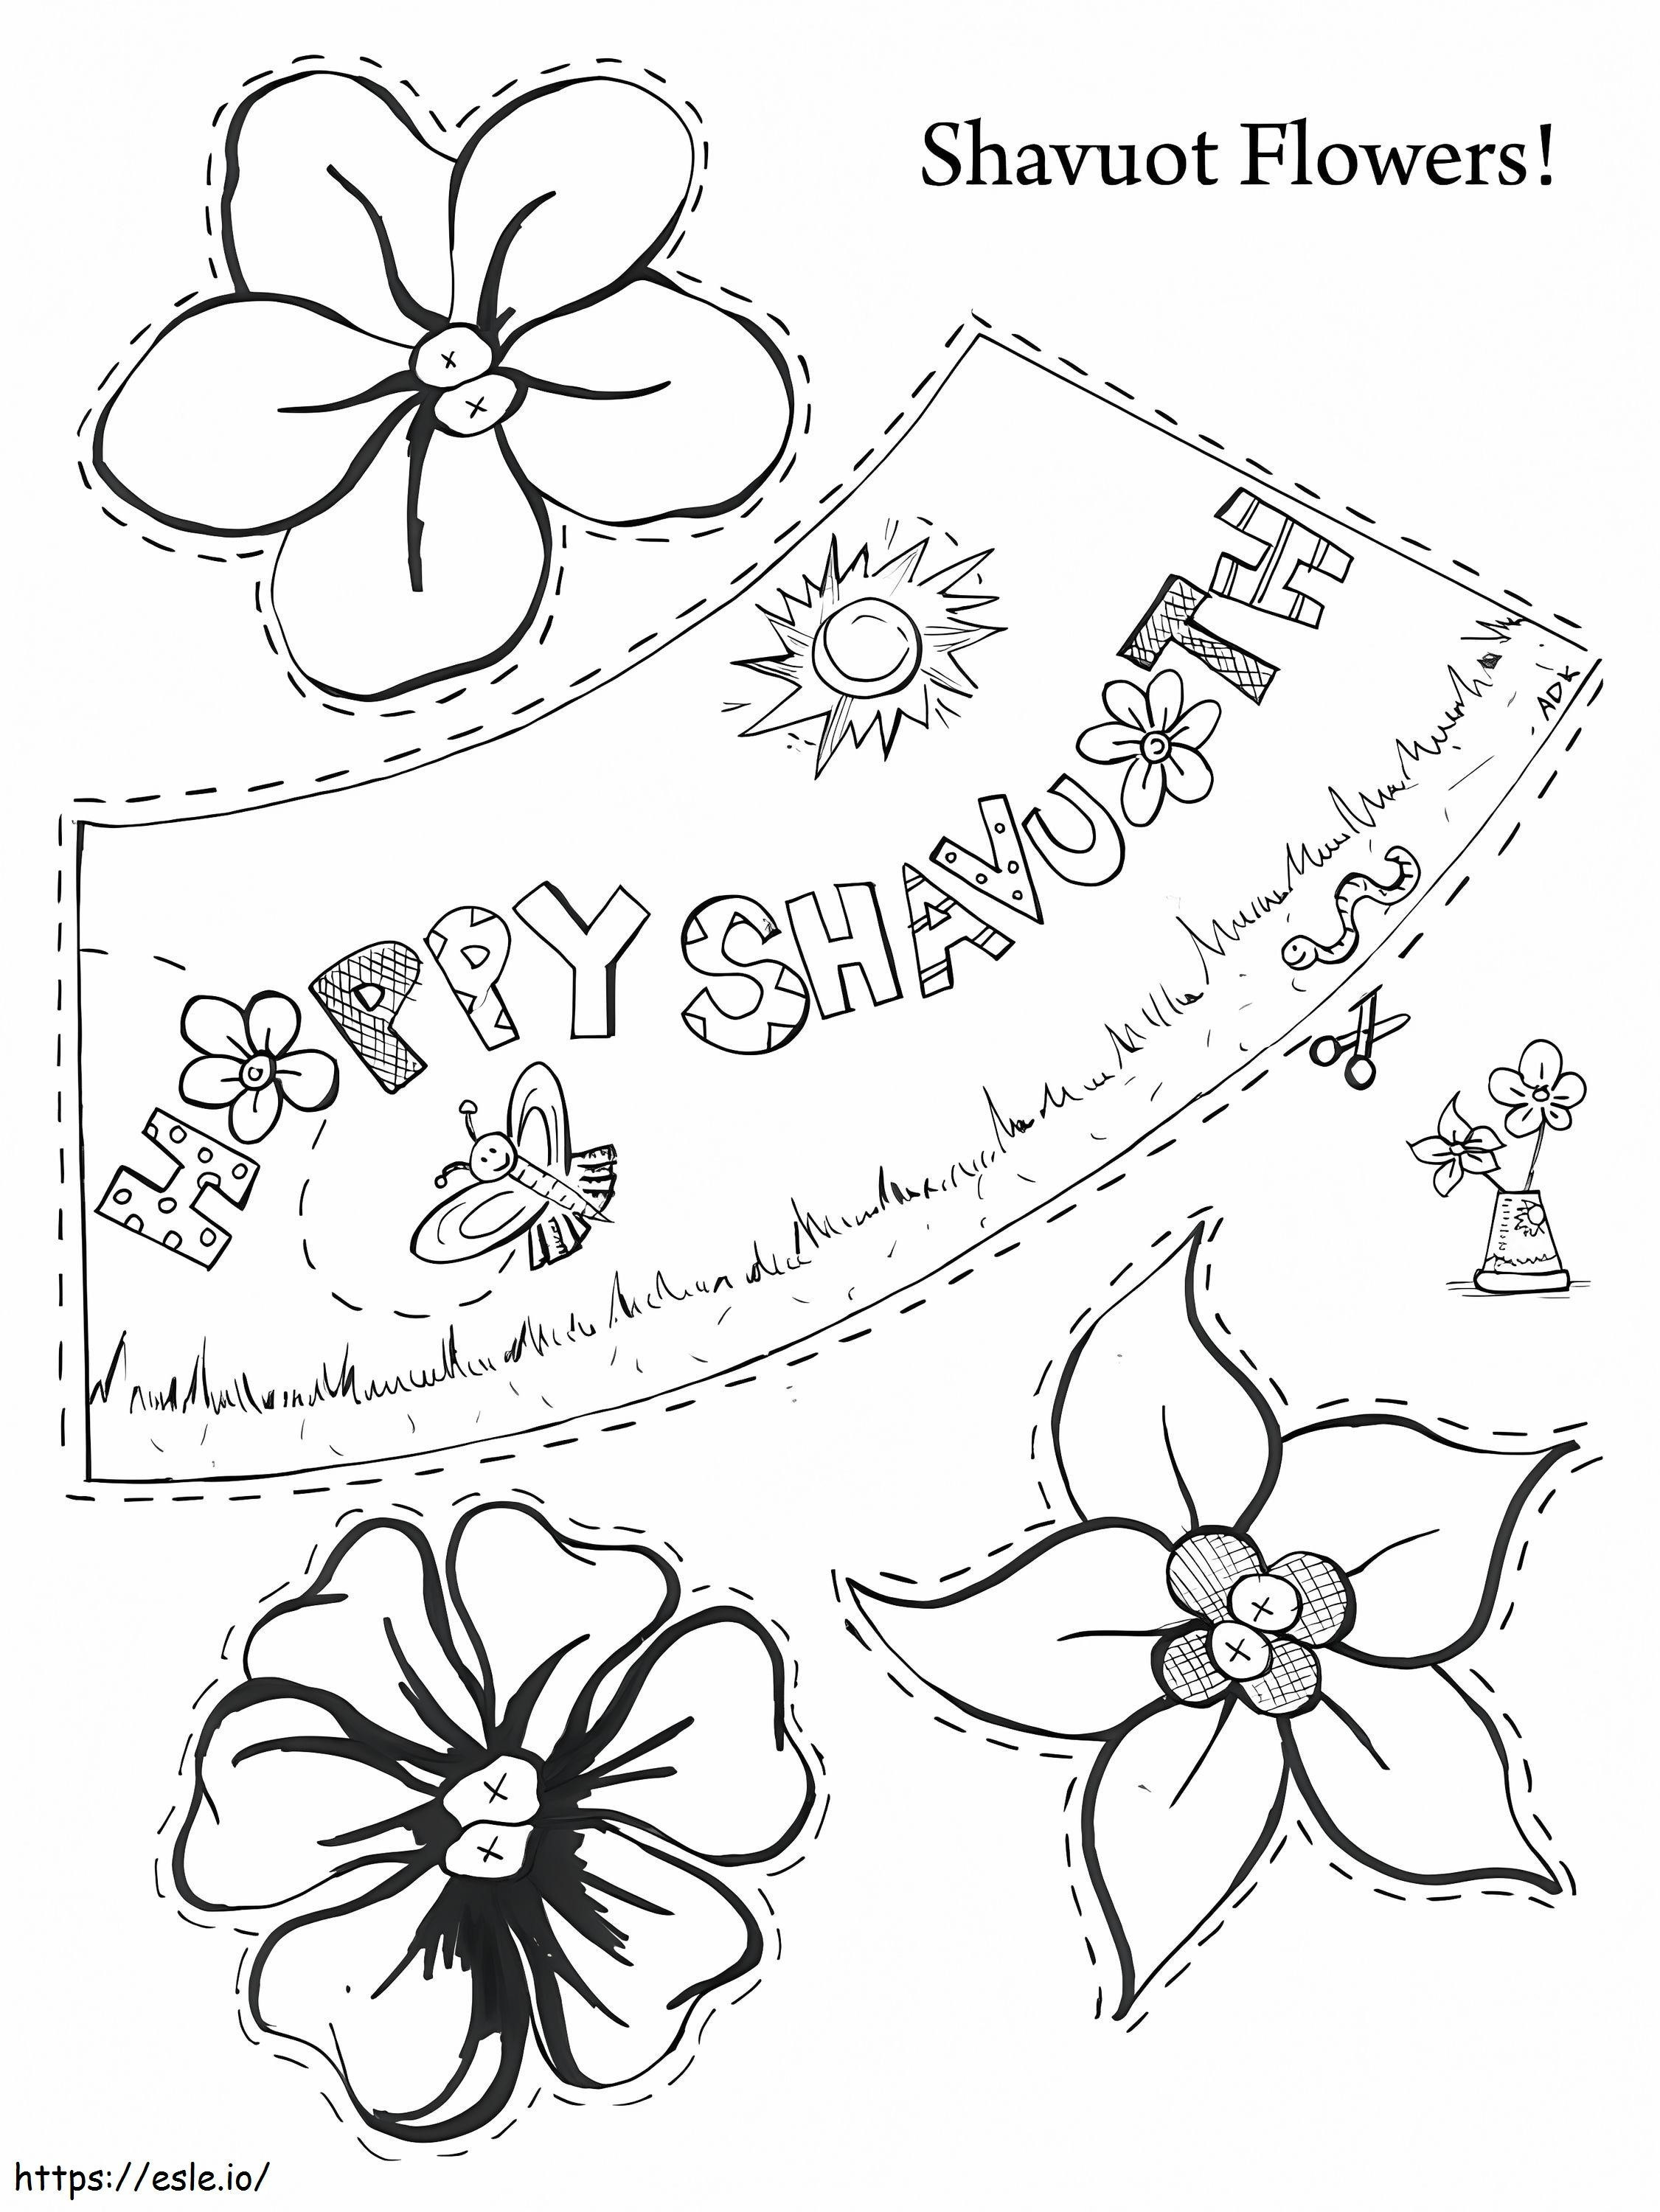 Shavuot 4 coloring page